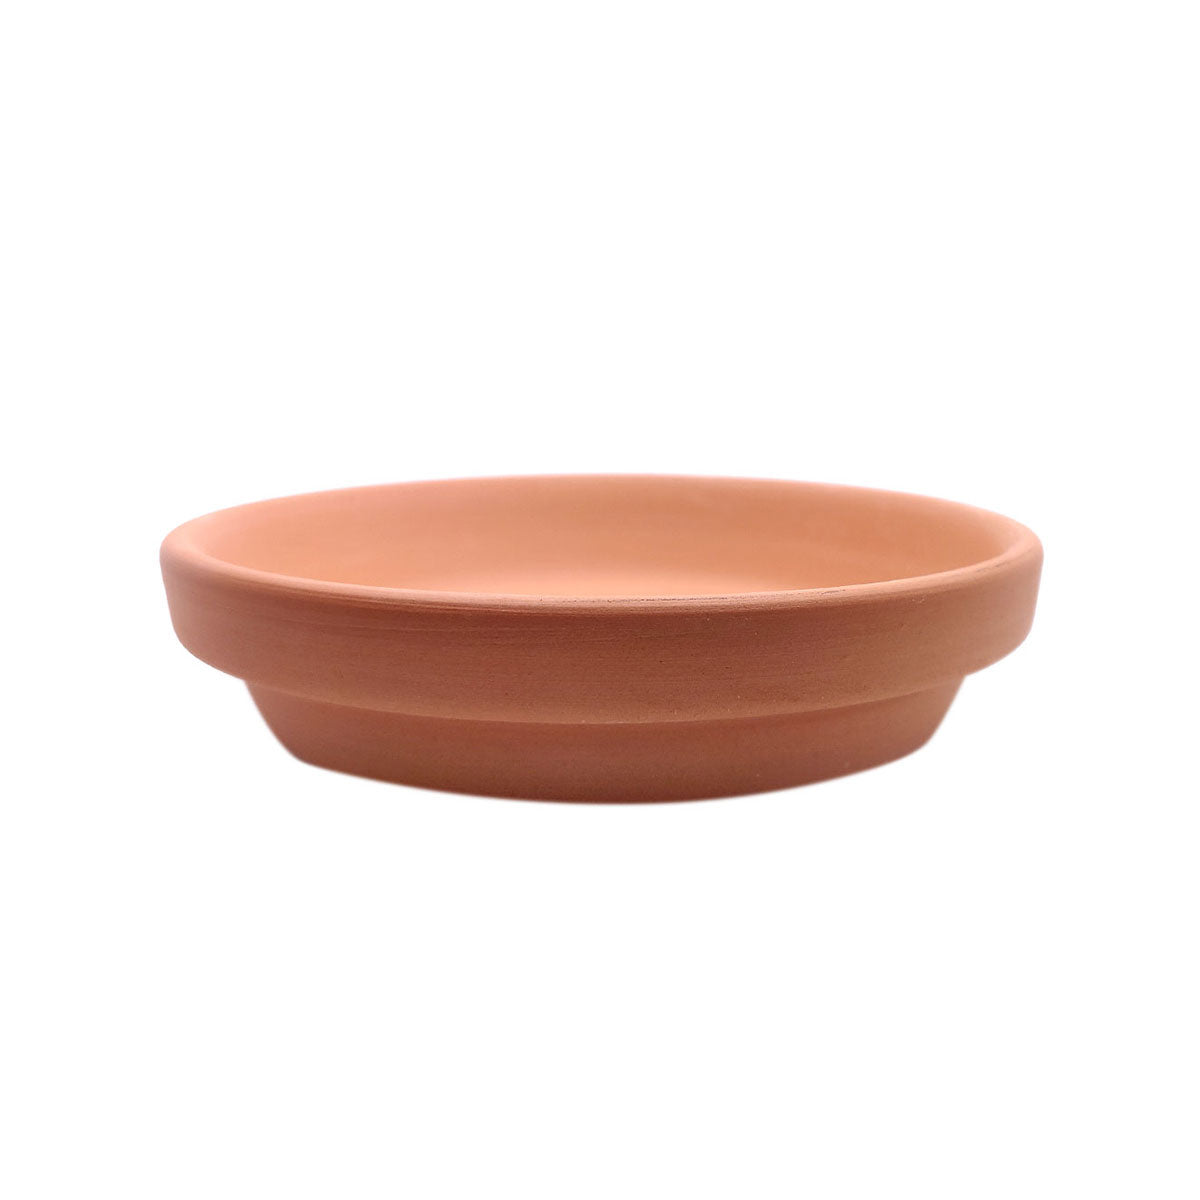 Terracotta Pot Saucer for sale, succulent accessories for sale, DIY succulent decor ideas, succulent gifts for friends